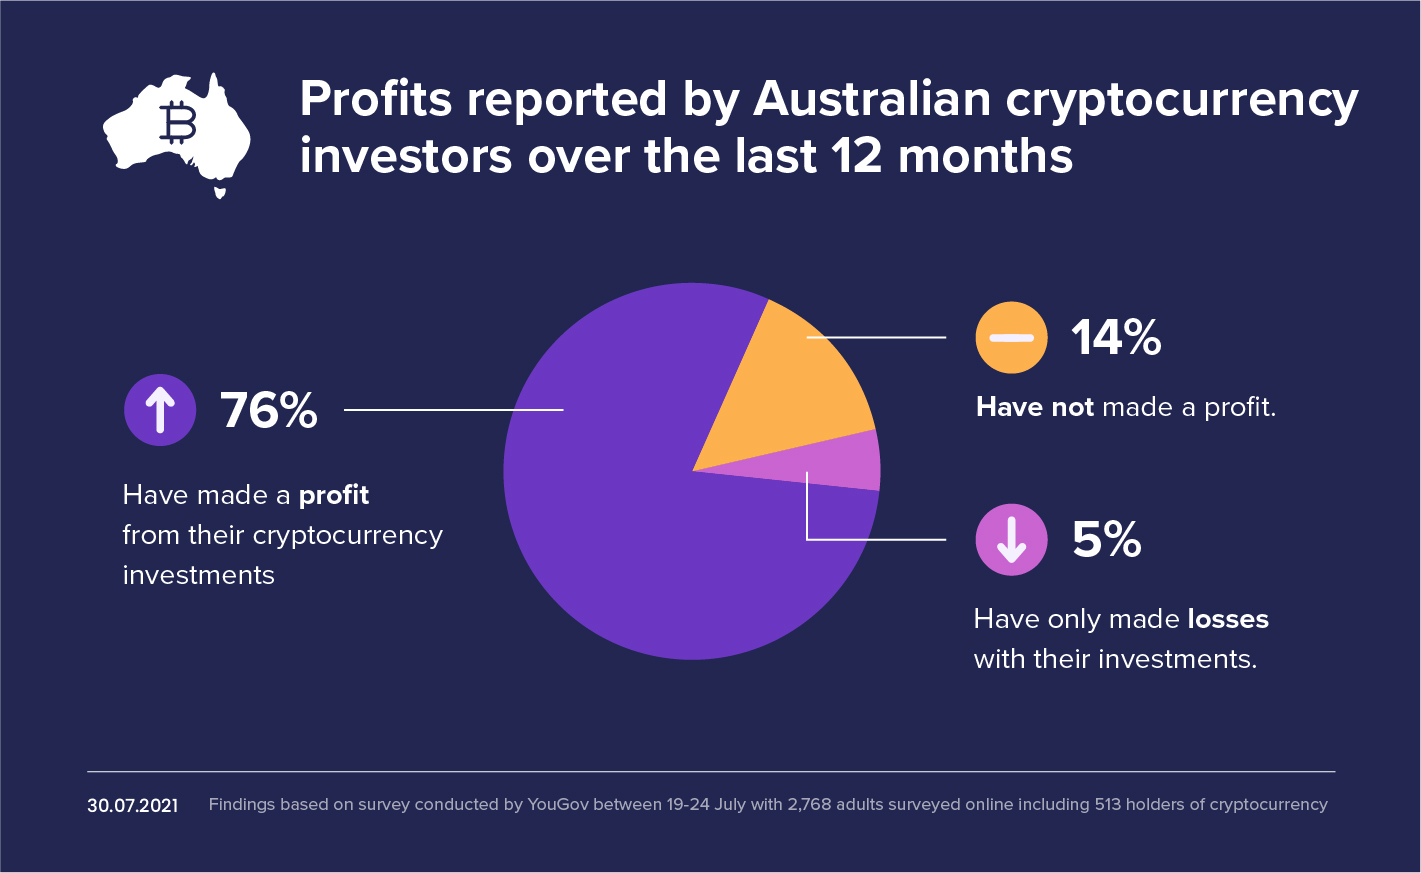 How to Make Profit With Cryptocurrency in Australia?